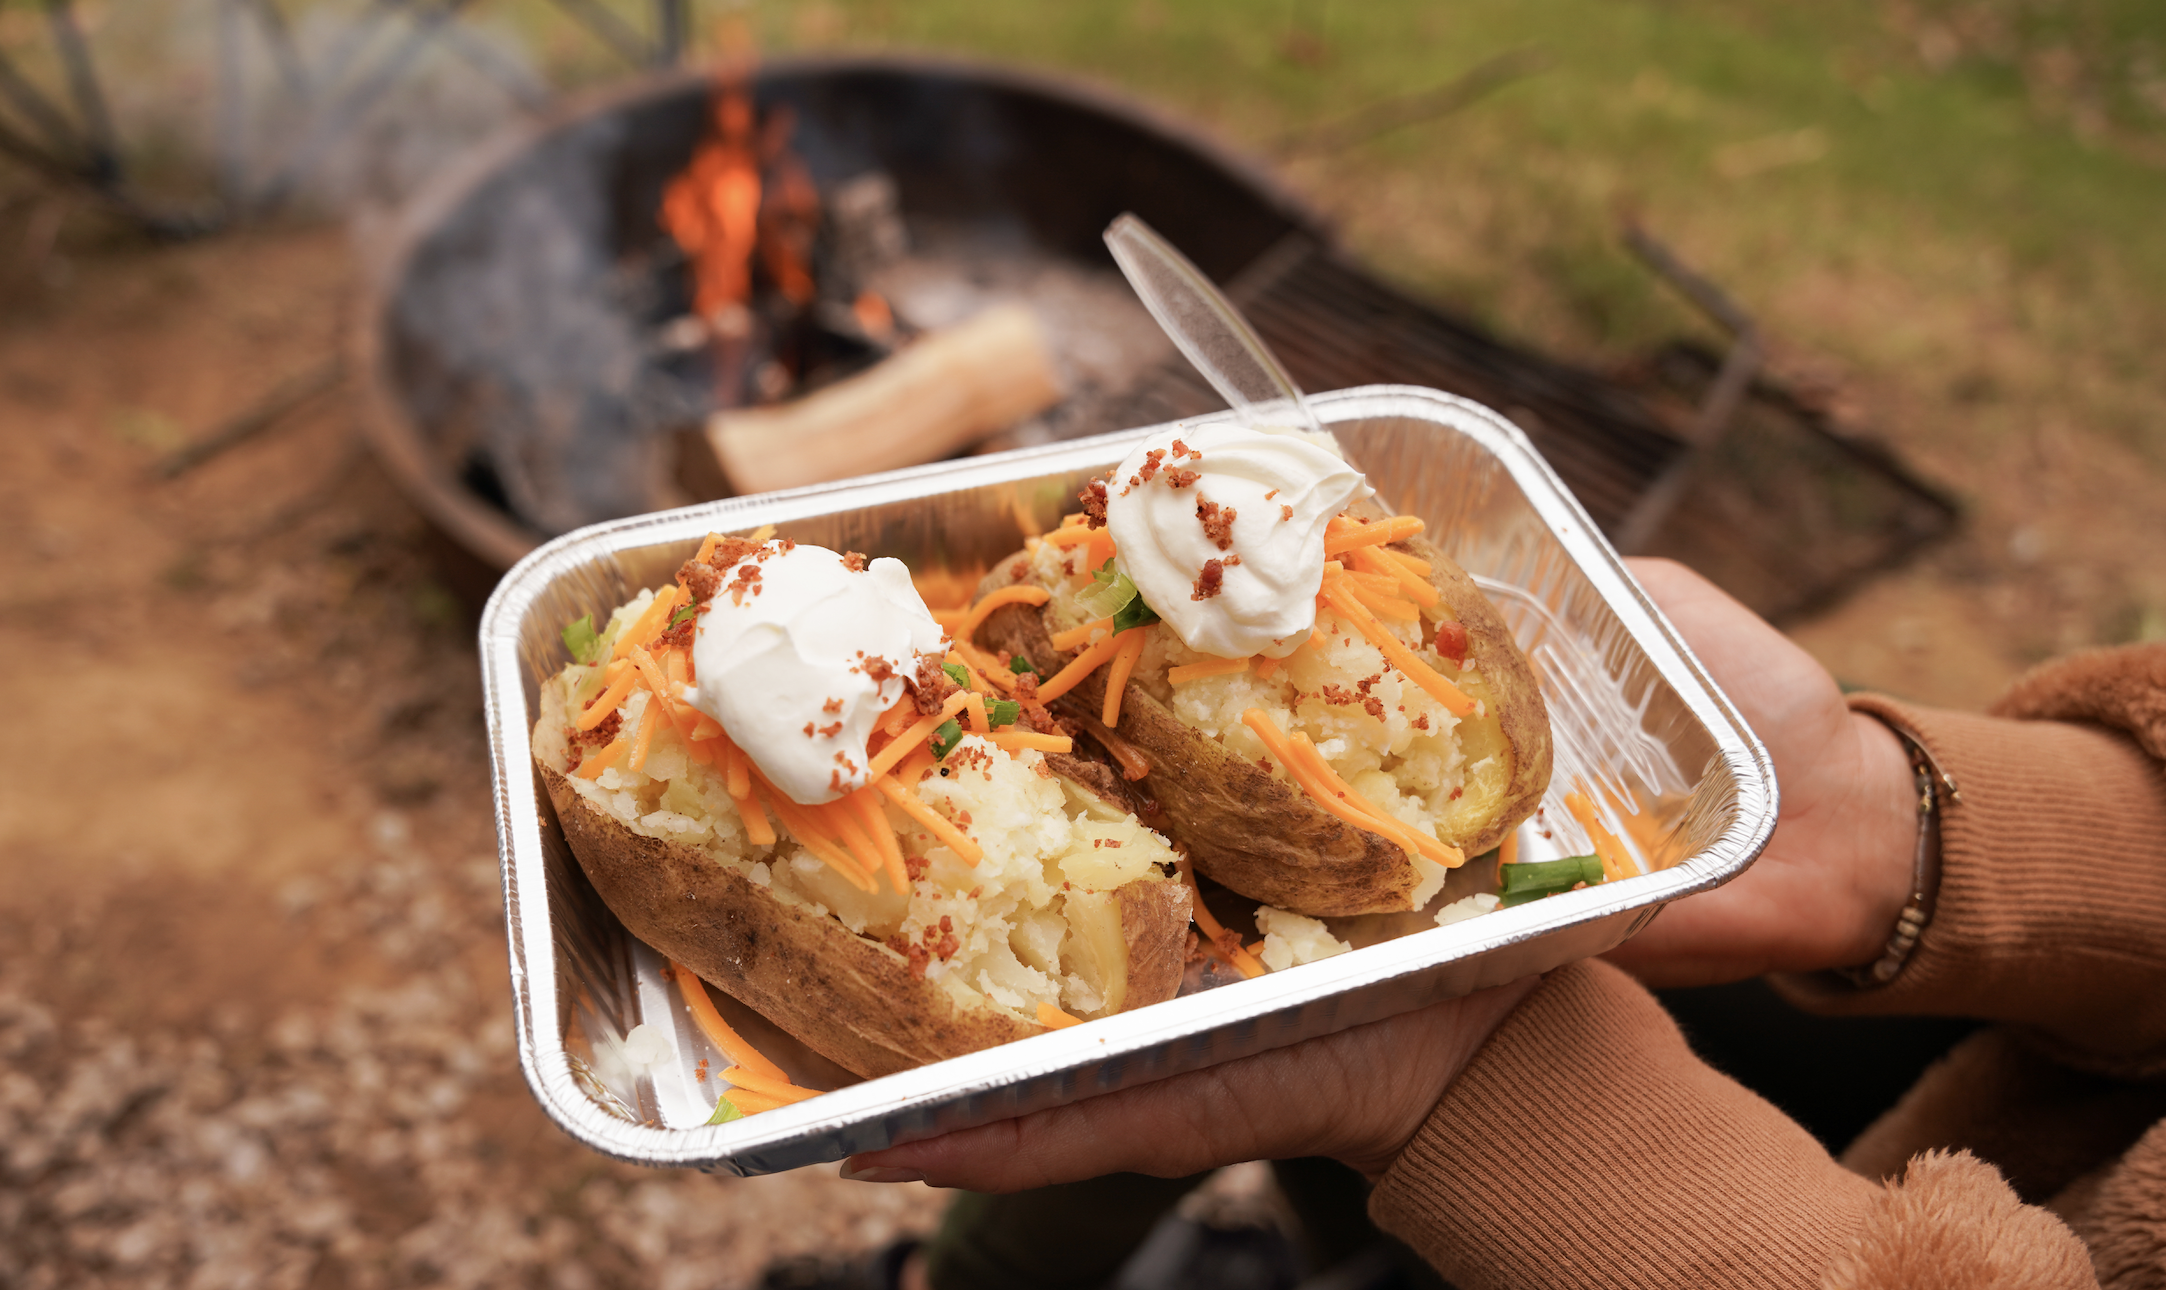 Baked Potatoes Easy Camping Dinner: in front of open fire pit camping